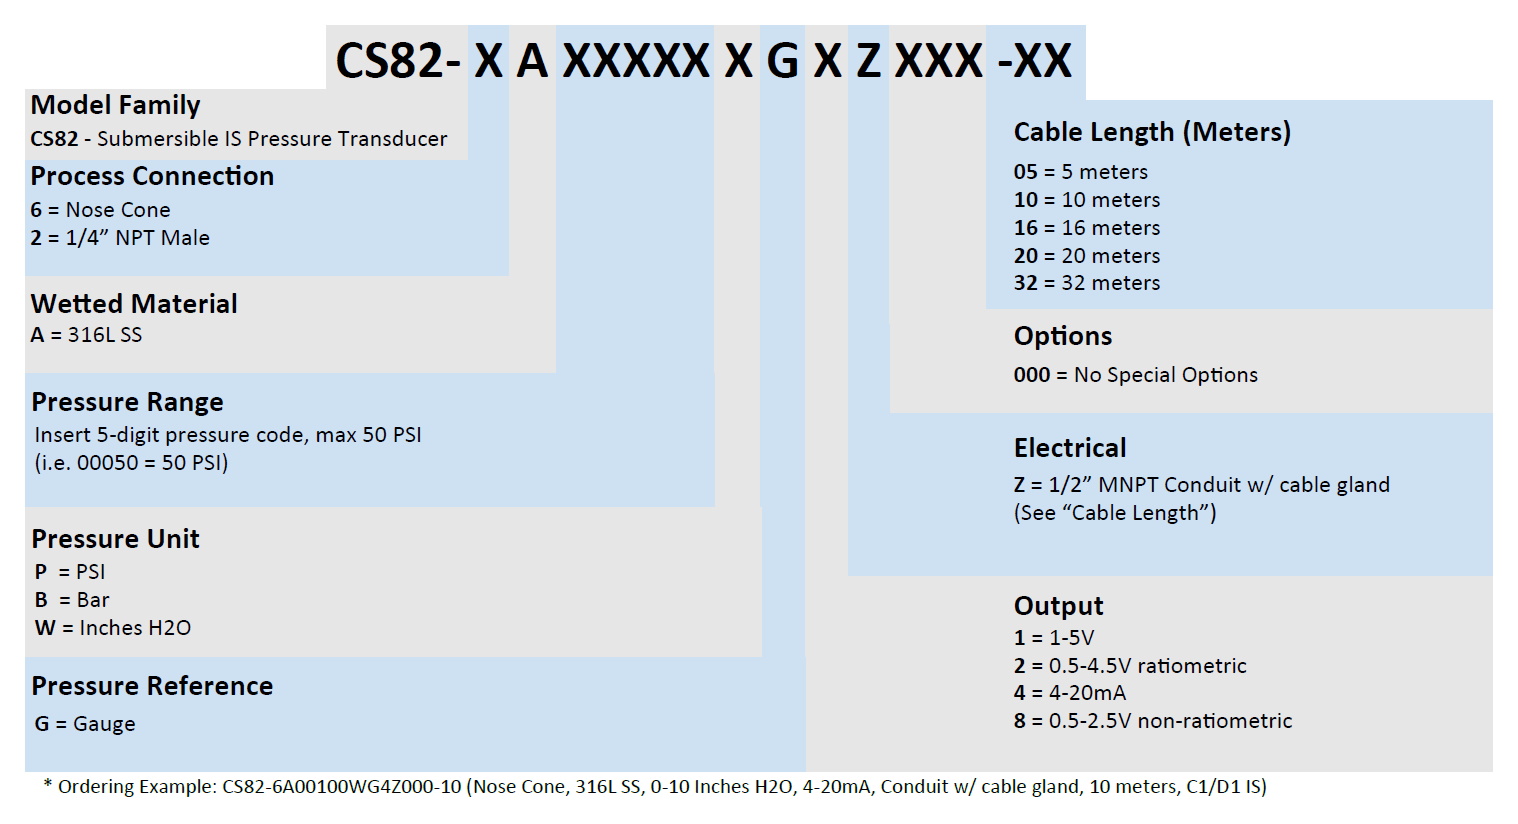 CS82 Part Number Example